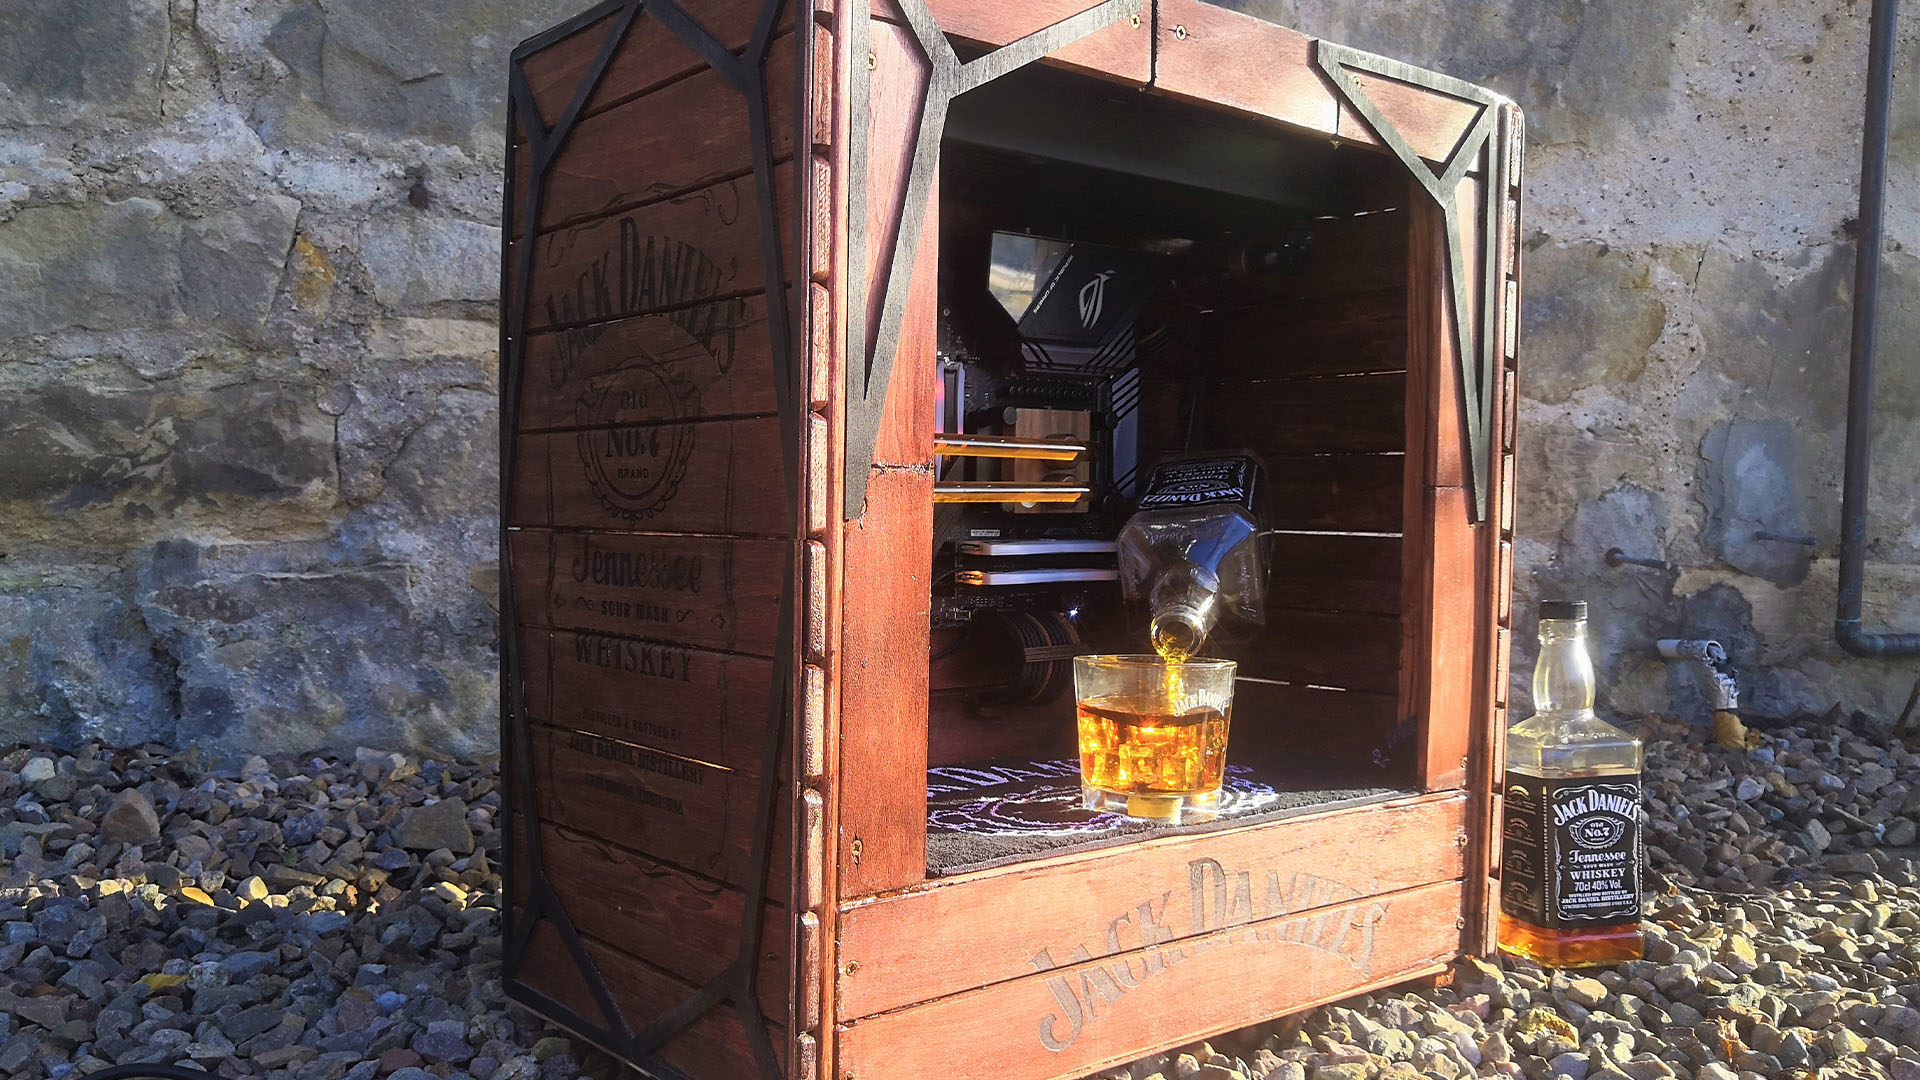 This Jack Daniel's gaming PC looks like it's filled with whiskey